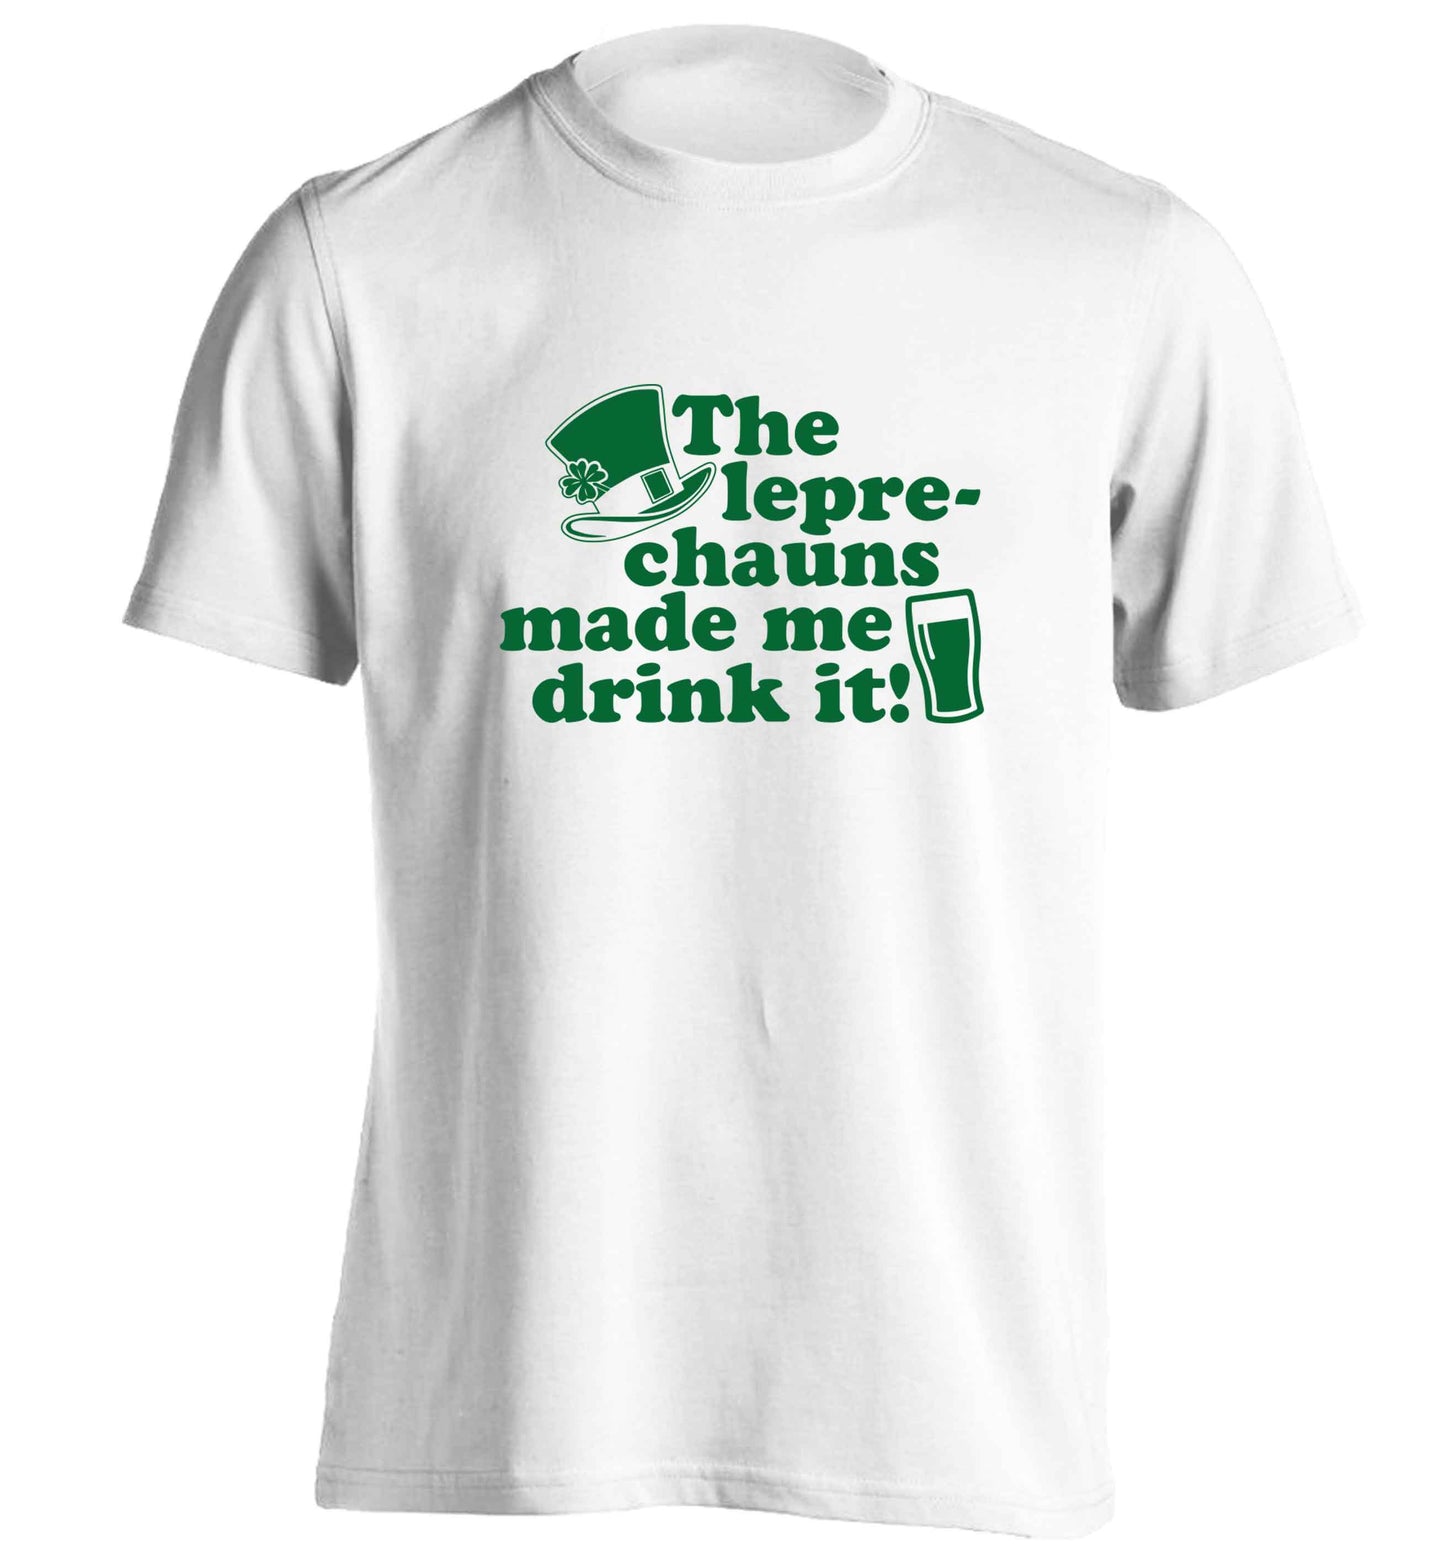 The leprechauns made me drink it adults unisex white Tshirt 2XL